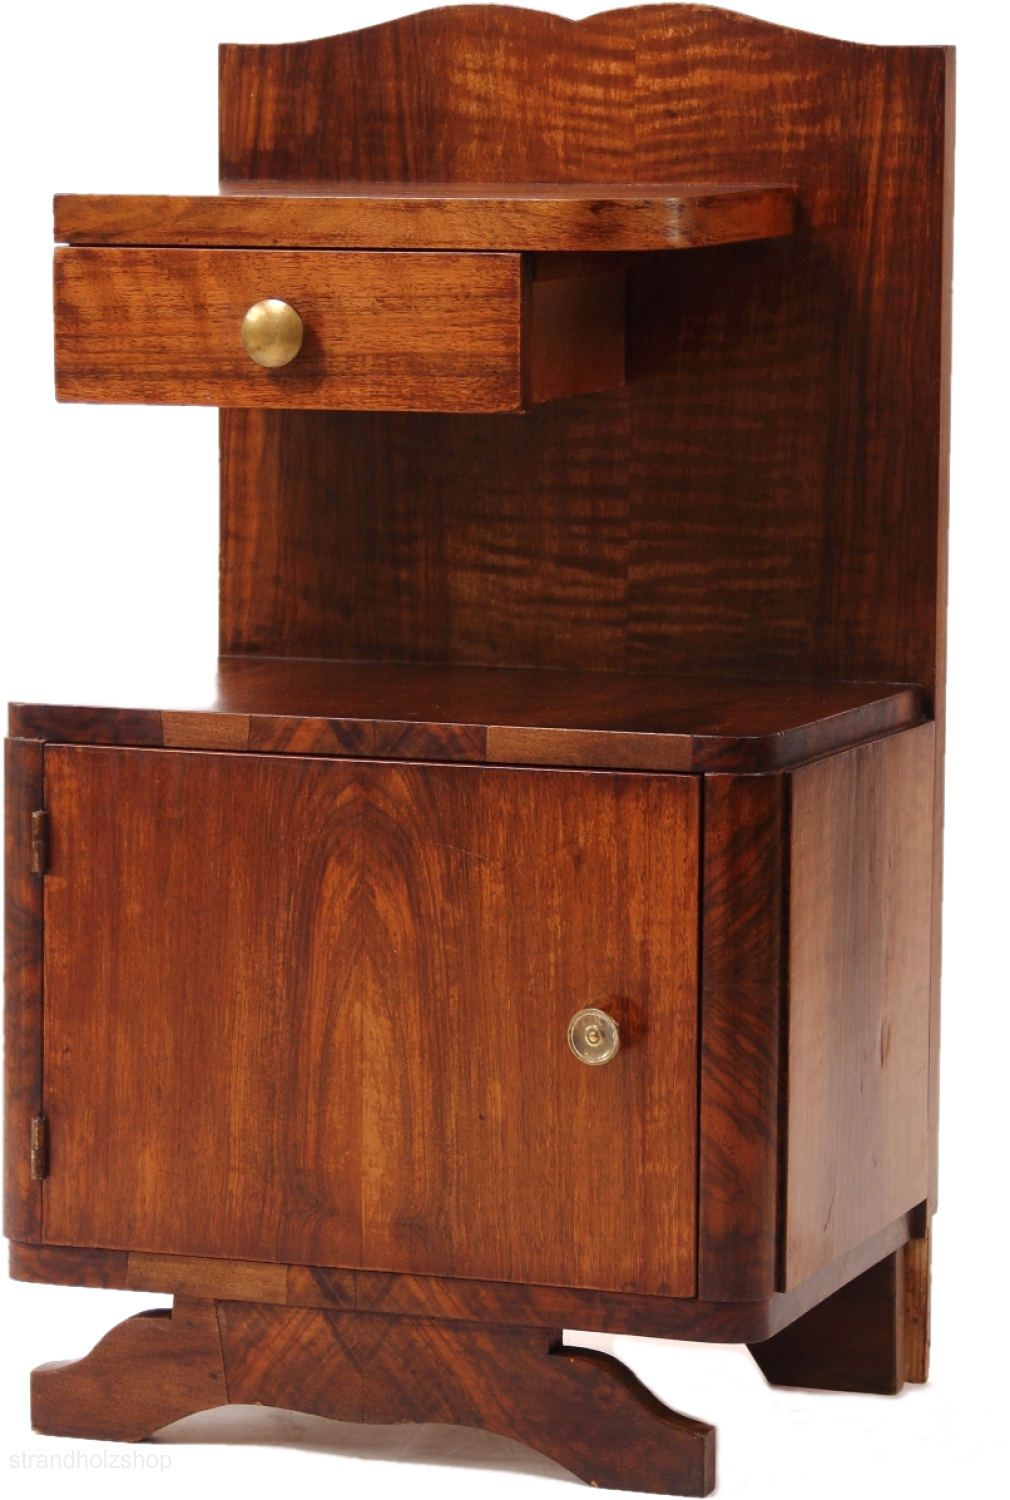 Small Art Deco Cabinet from France